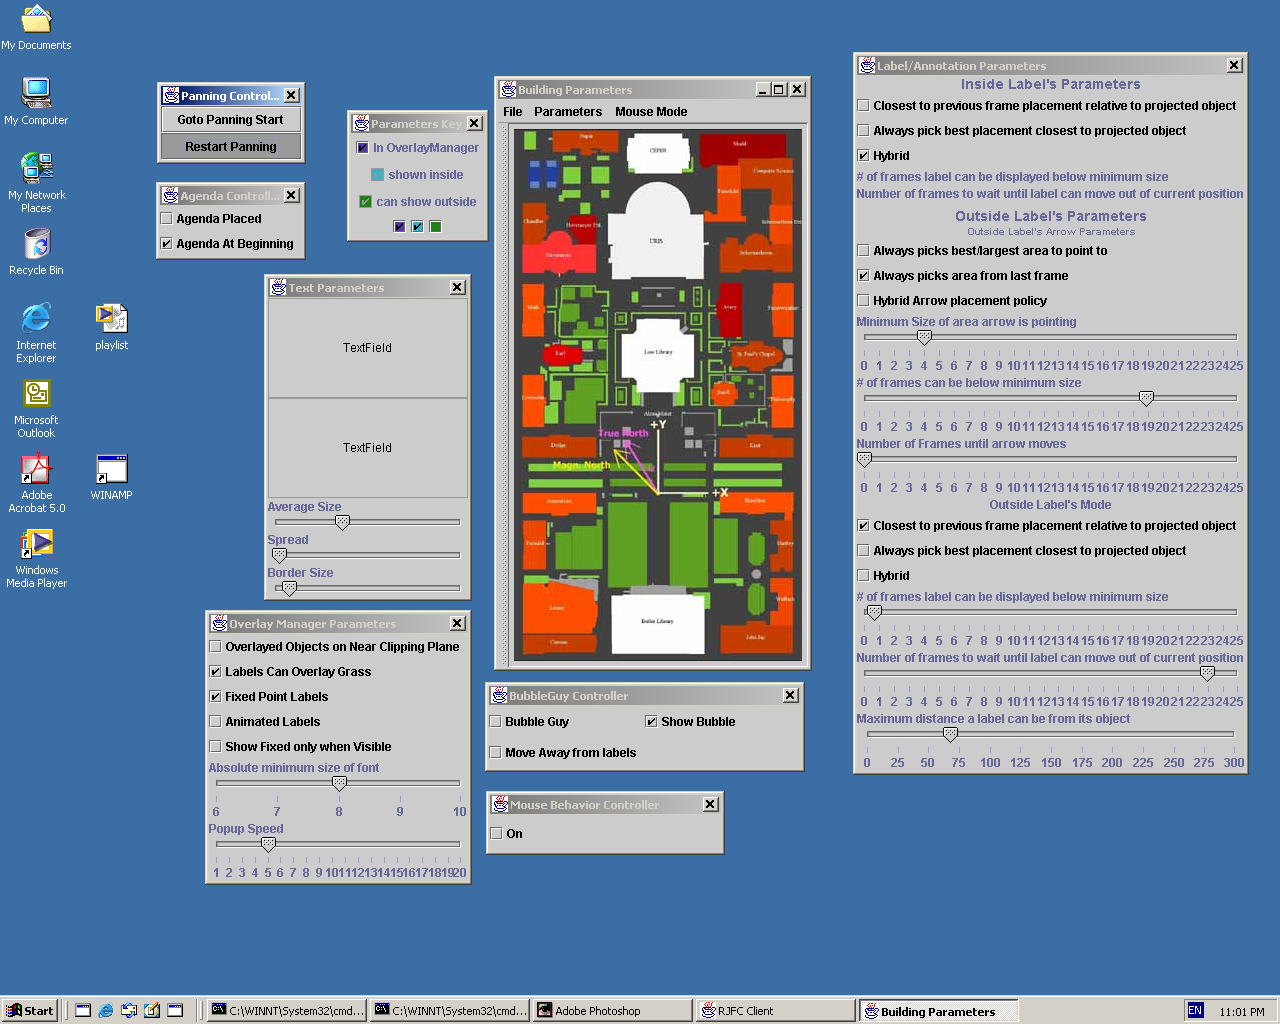 Screenshot of a complex UI implemented in RJFC